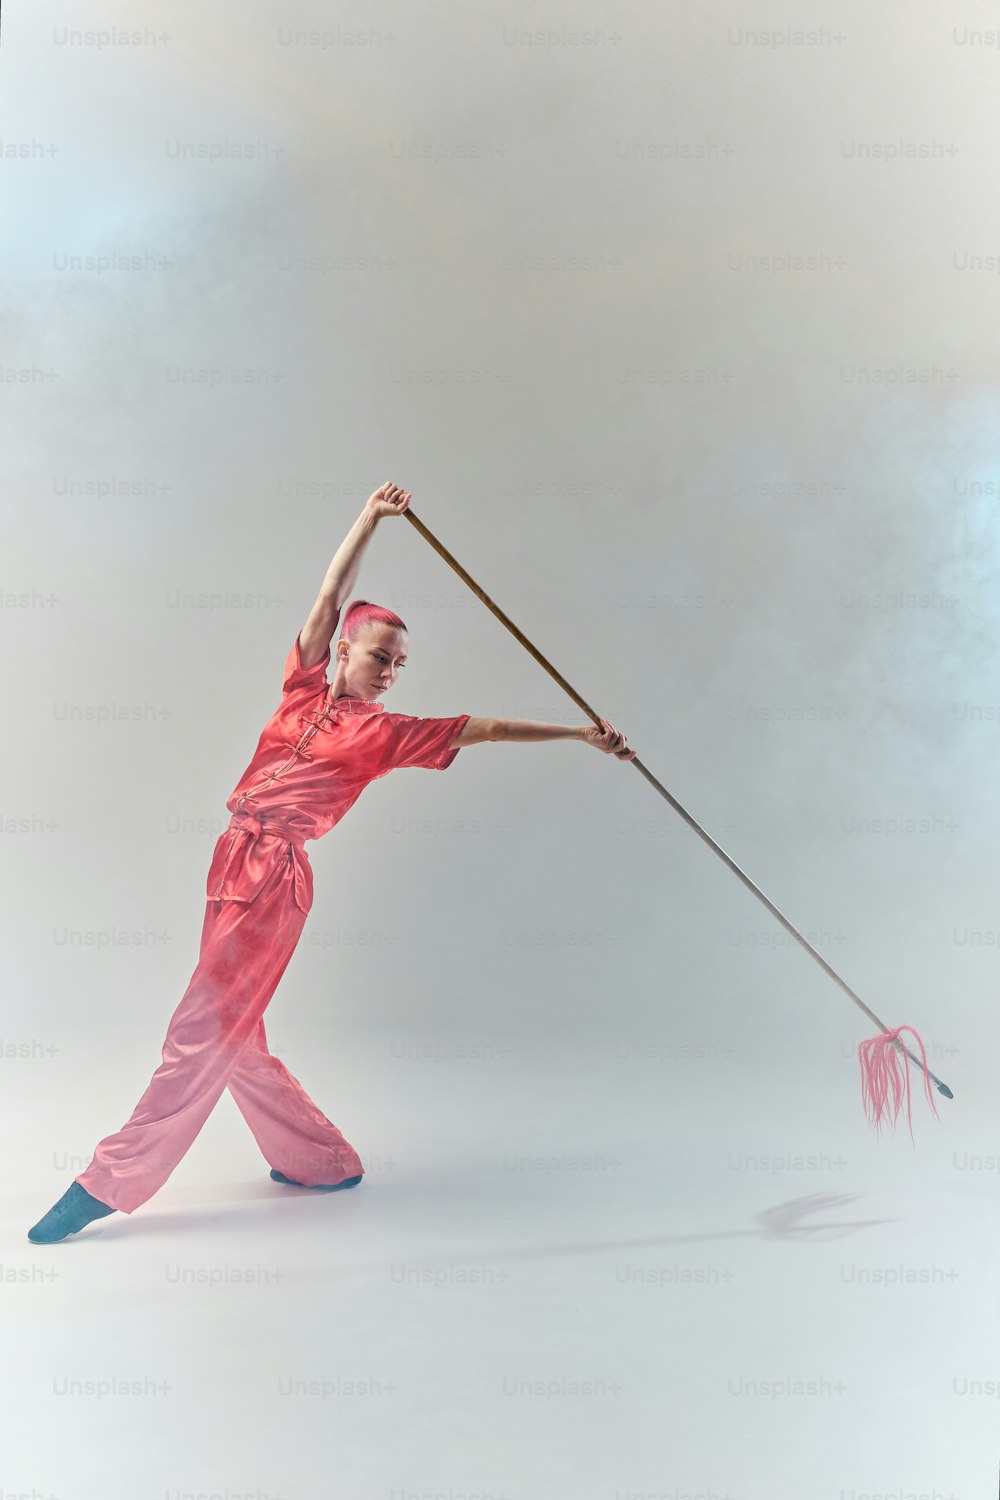 a man in a red outfit is holding a pole